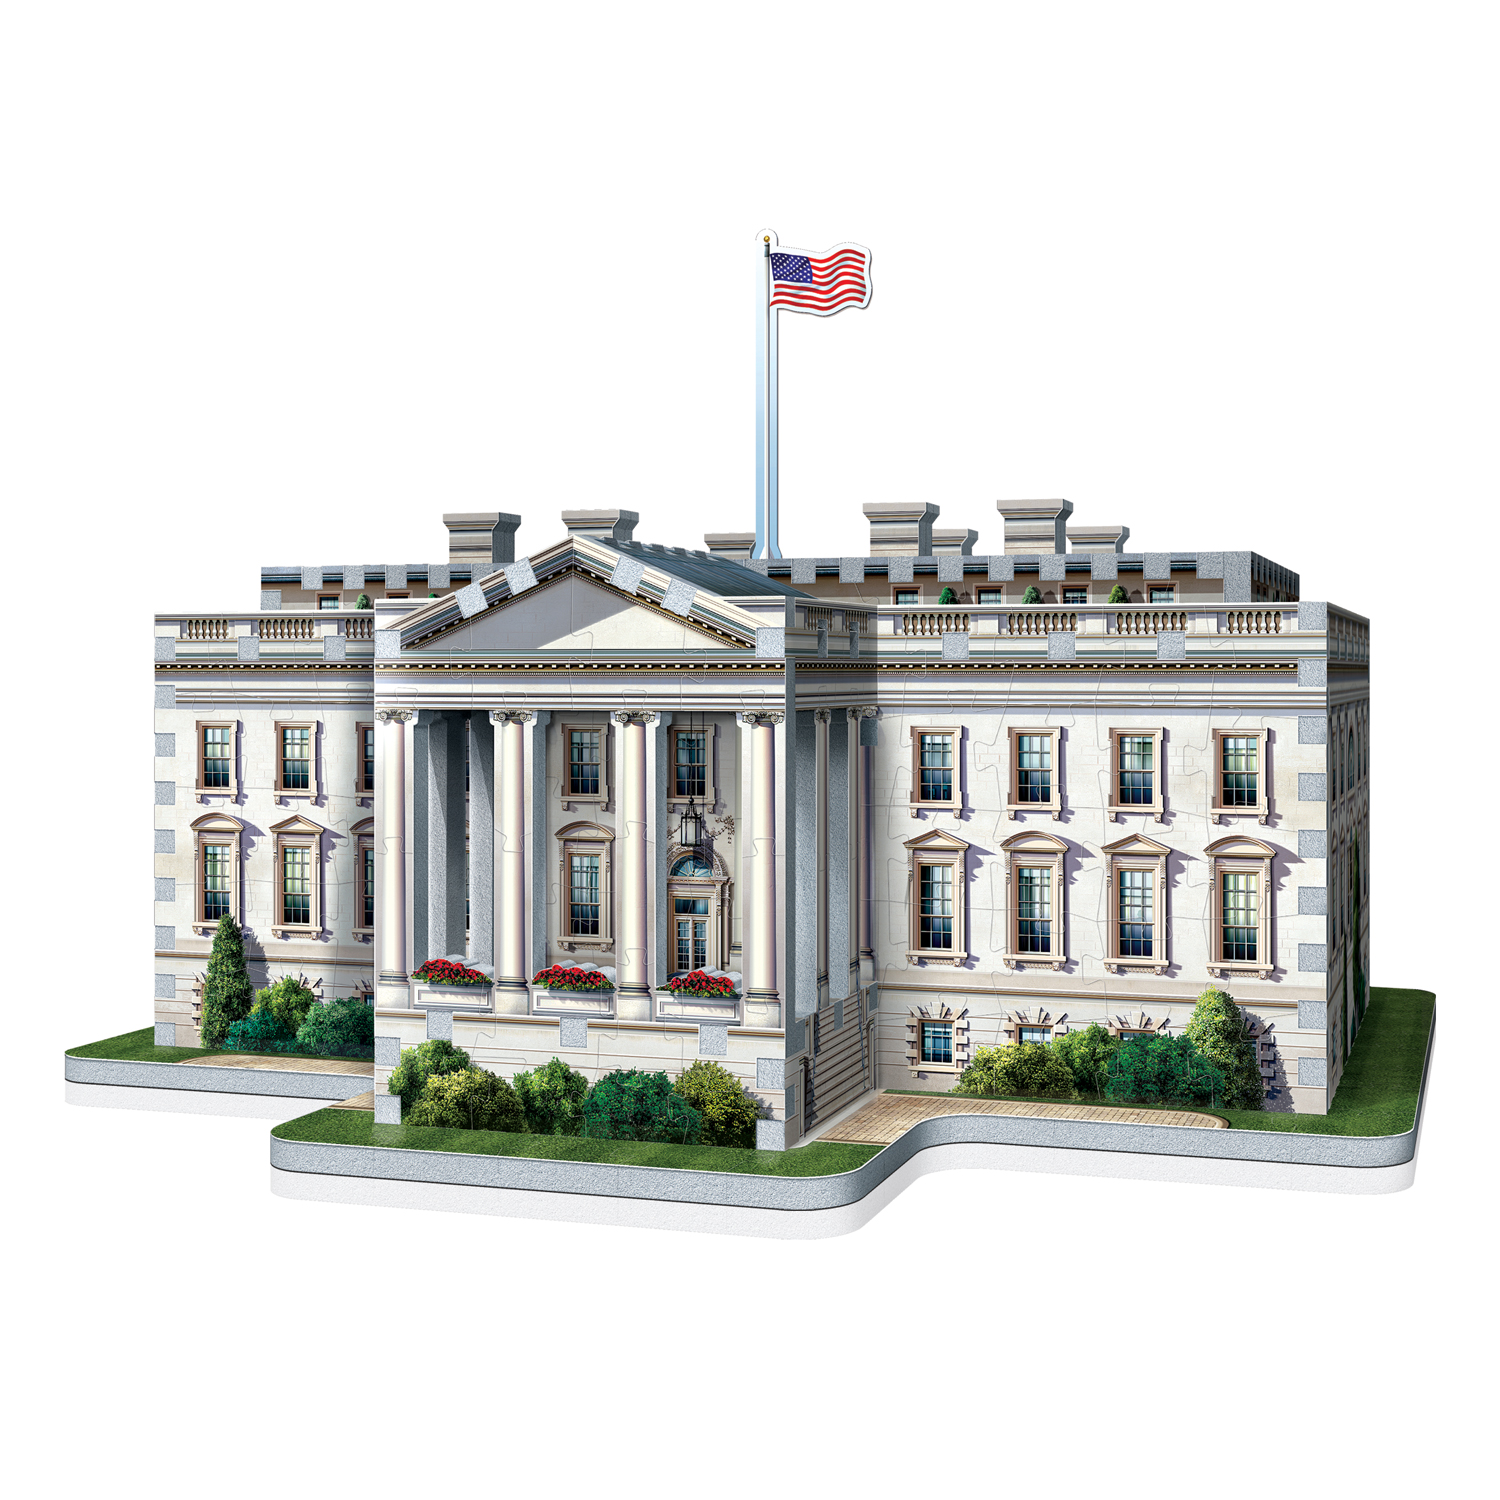 Puzz 3D Puzz 3D Jigsaw Puzzle The White House 443 piece Complete 